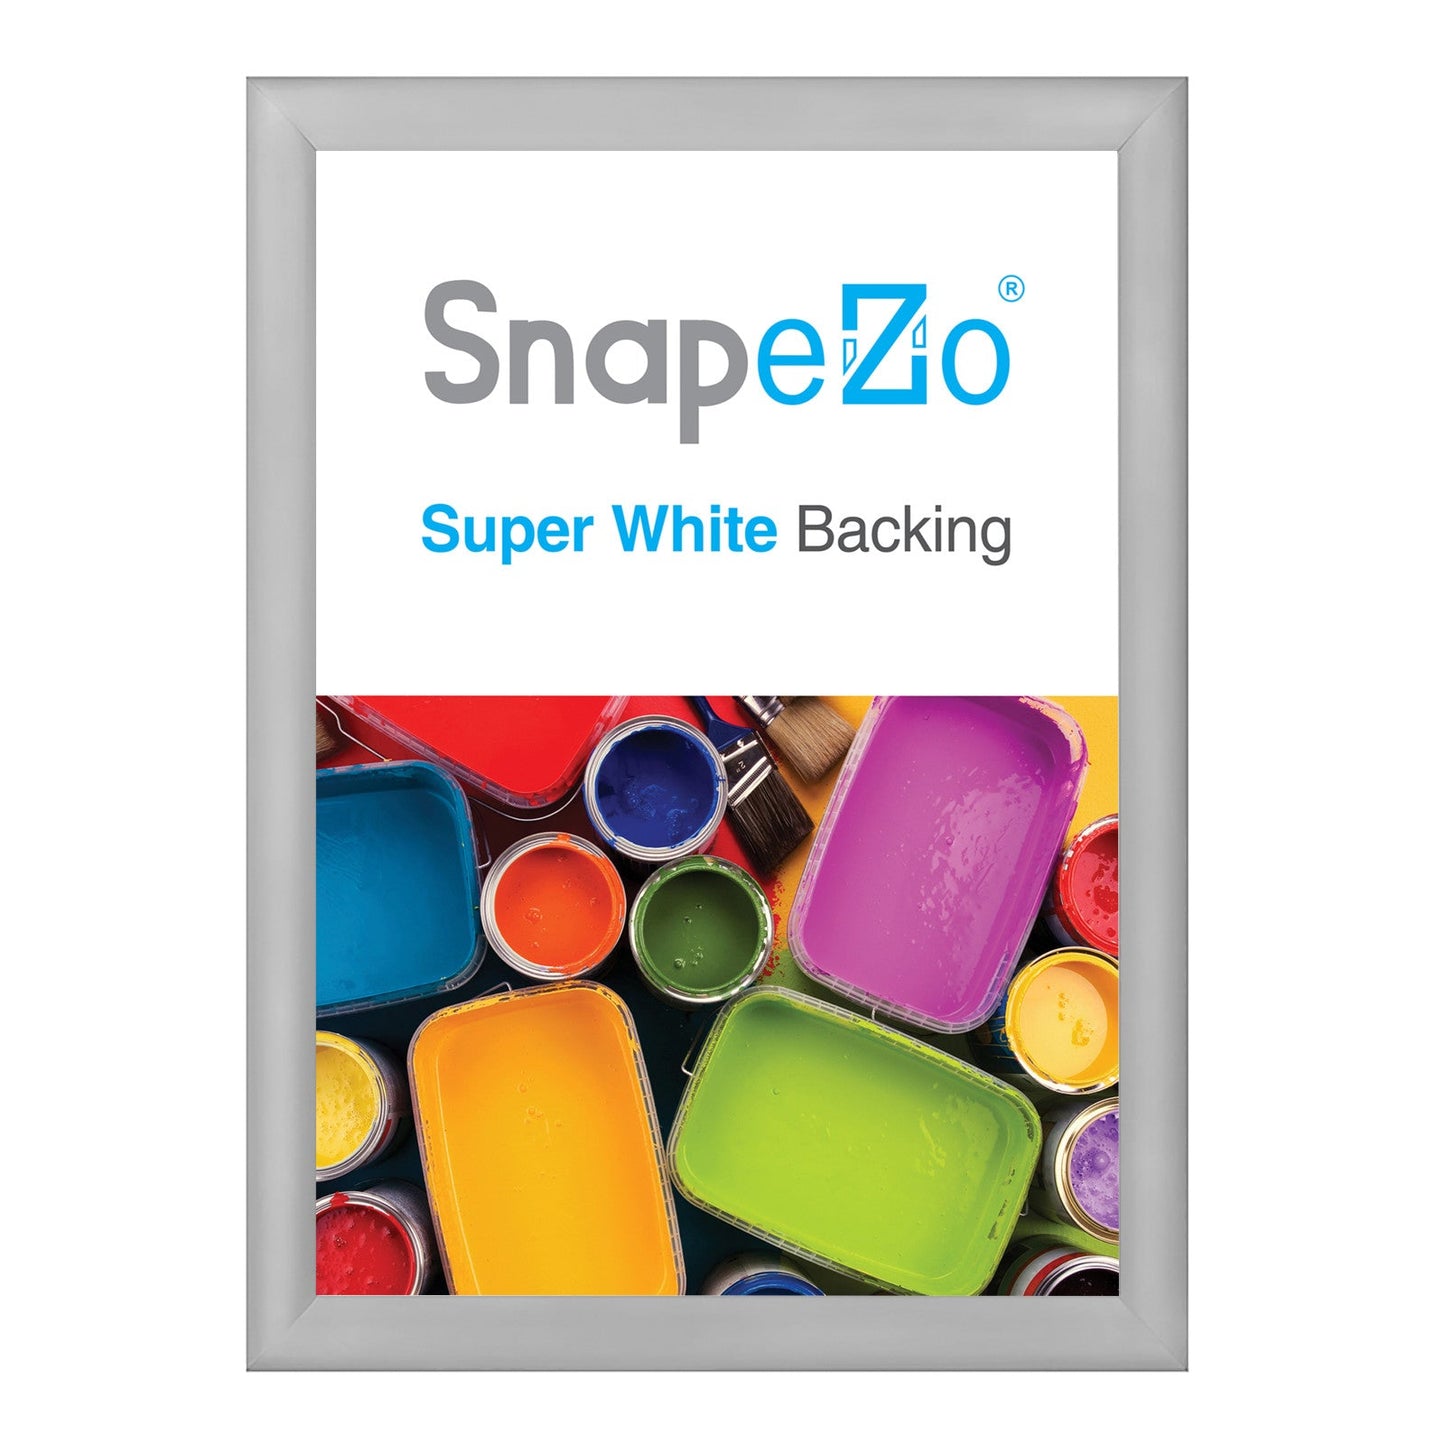 Load image into Gallery viewer, 23x32 Silver SnapeZo® Snap Frame - 1.2&amp;quot; Profile
